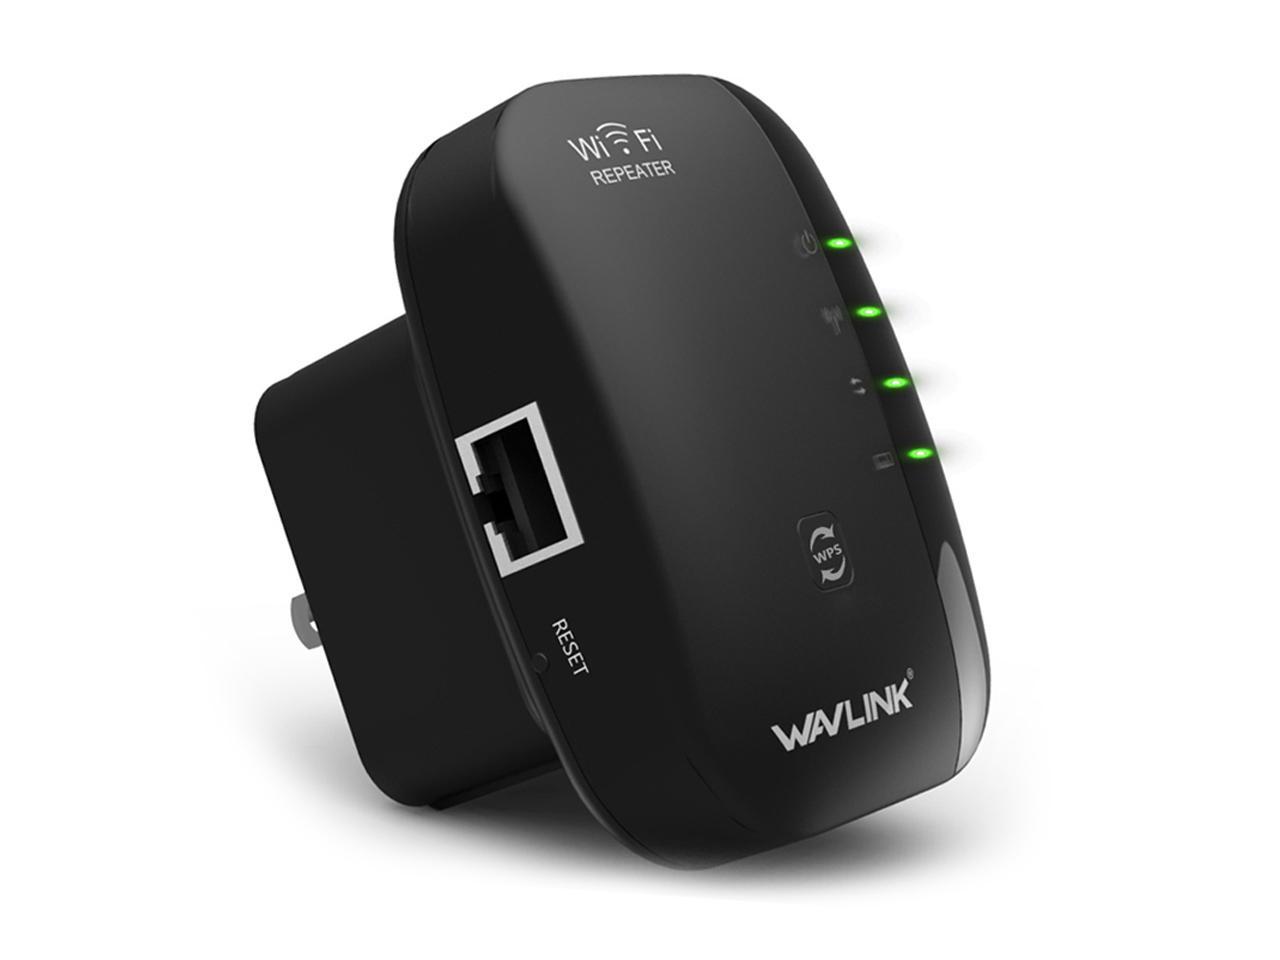 Wavlink New Generation N300 Wifi Repeater 300mbps Range Extender Access Point 802 11n B G Network With 3dbi Internal Antennas Wps Protection Support Repeater Ap Mode Newegg Com